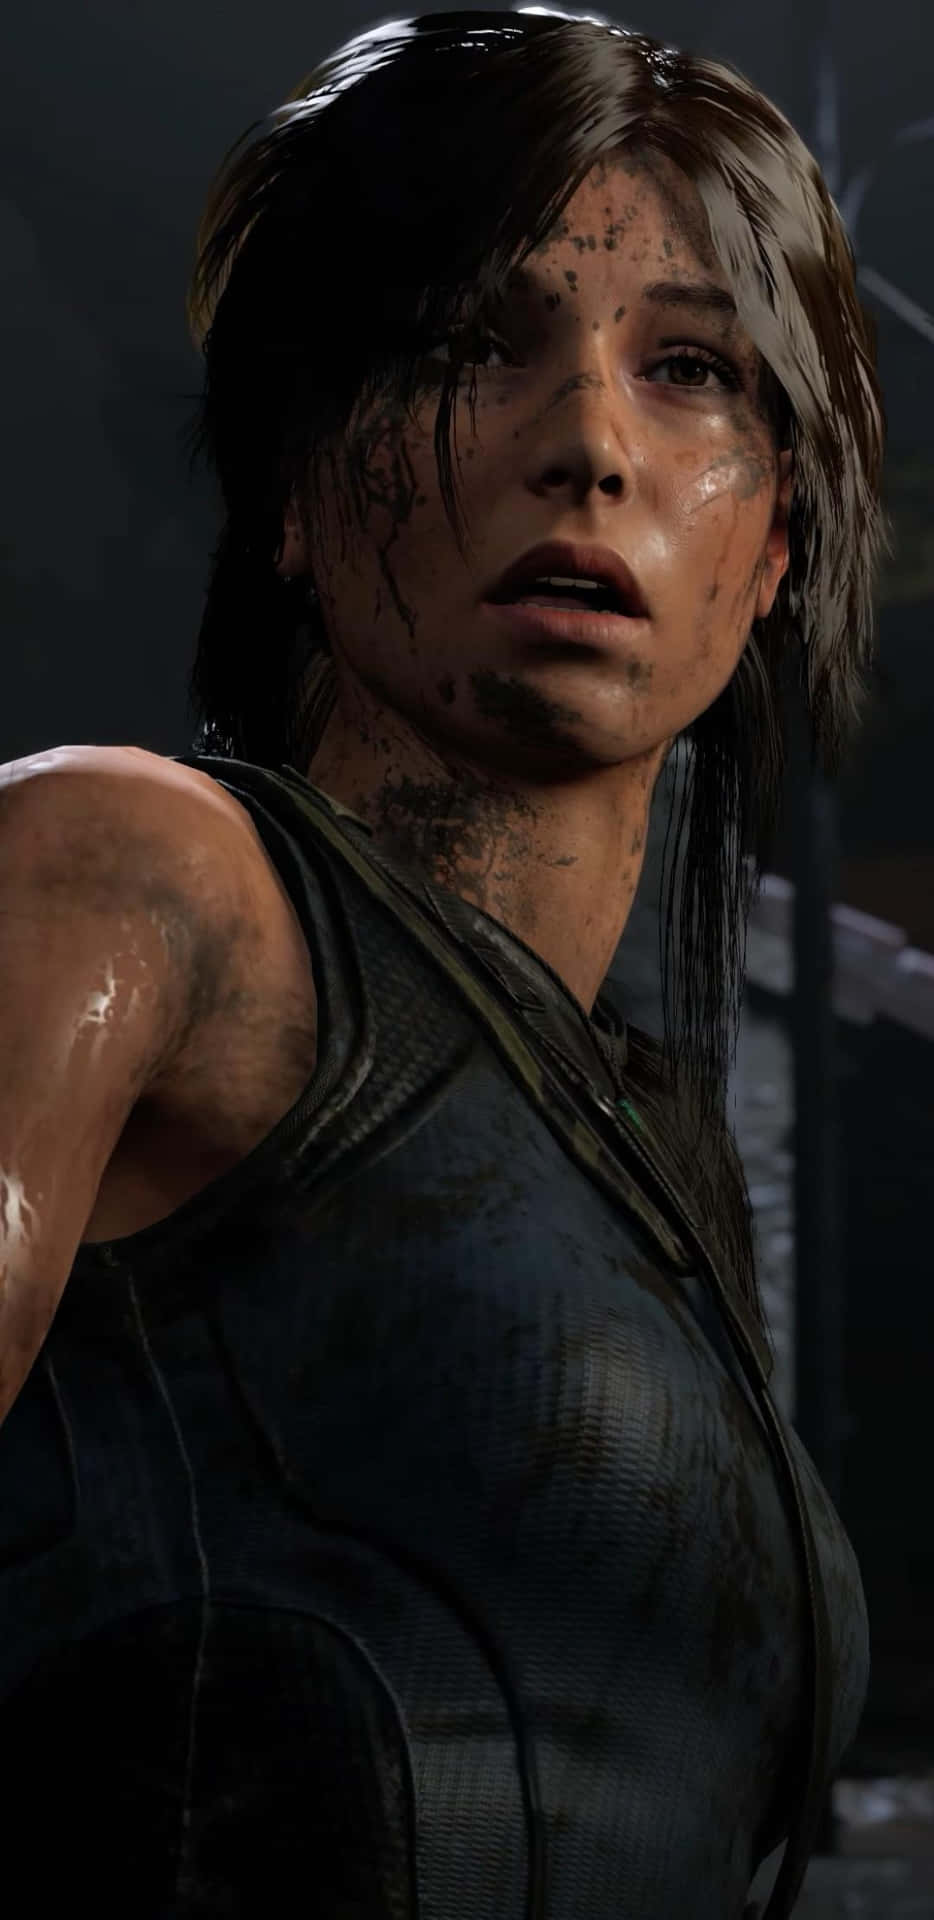 Celebrate Gaming with the Brand New Tomb Raider Phone Wallpaper